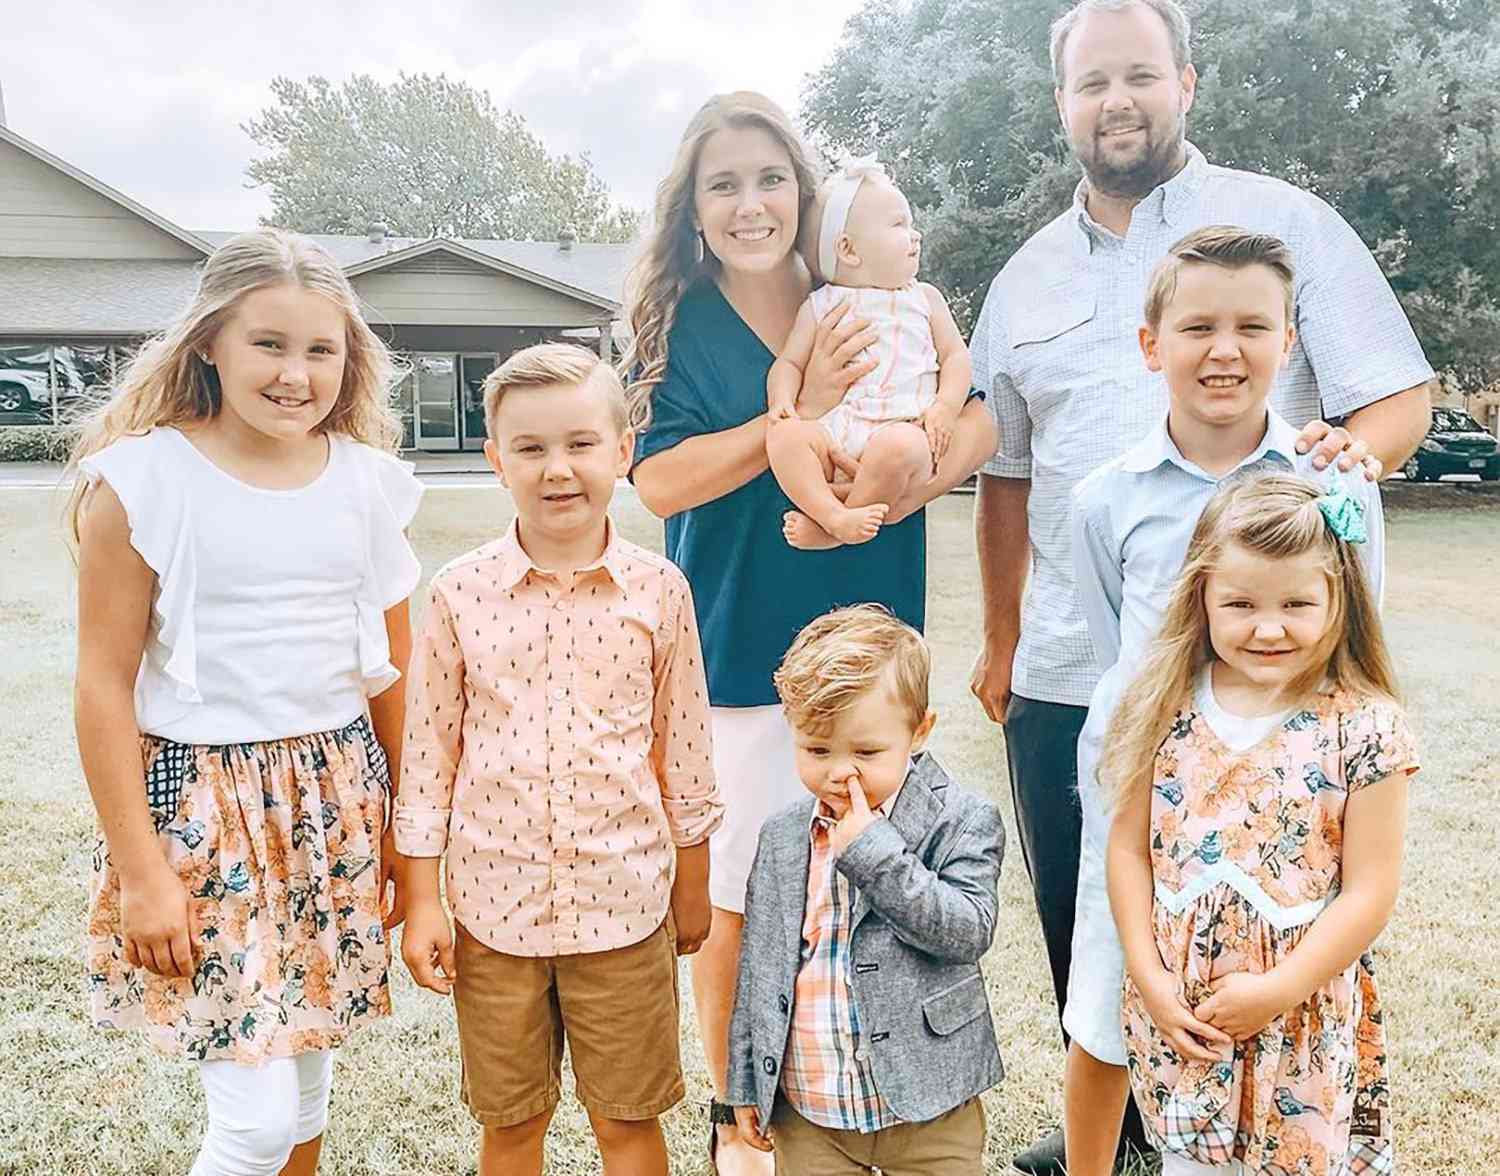 Josh Duggar: What to Know About Jim Bob and Michelle's Eldest Child - from 19 Kids and Counting to His Arrest - PEOPLE